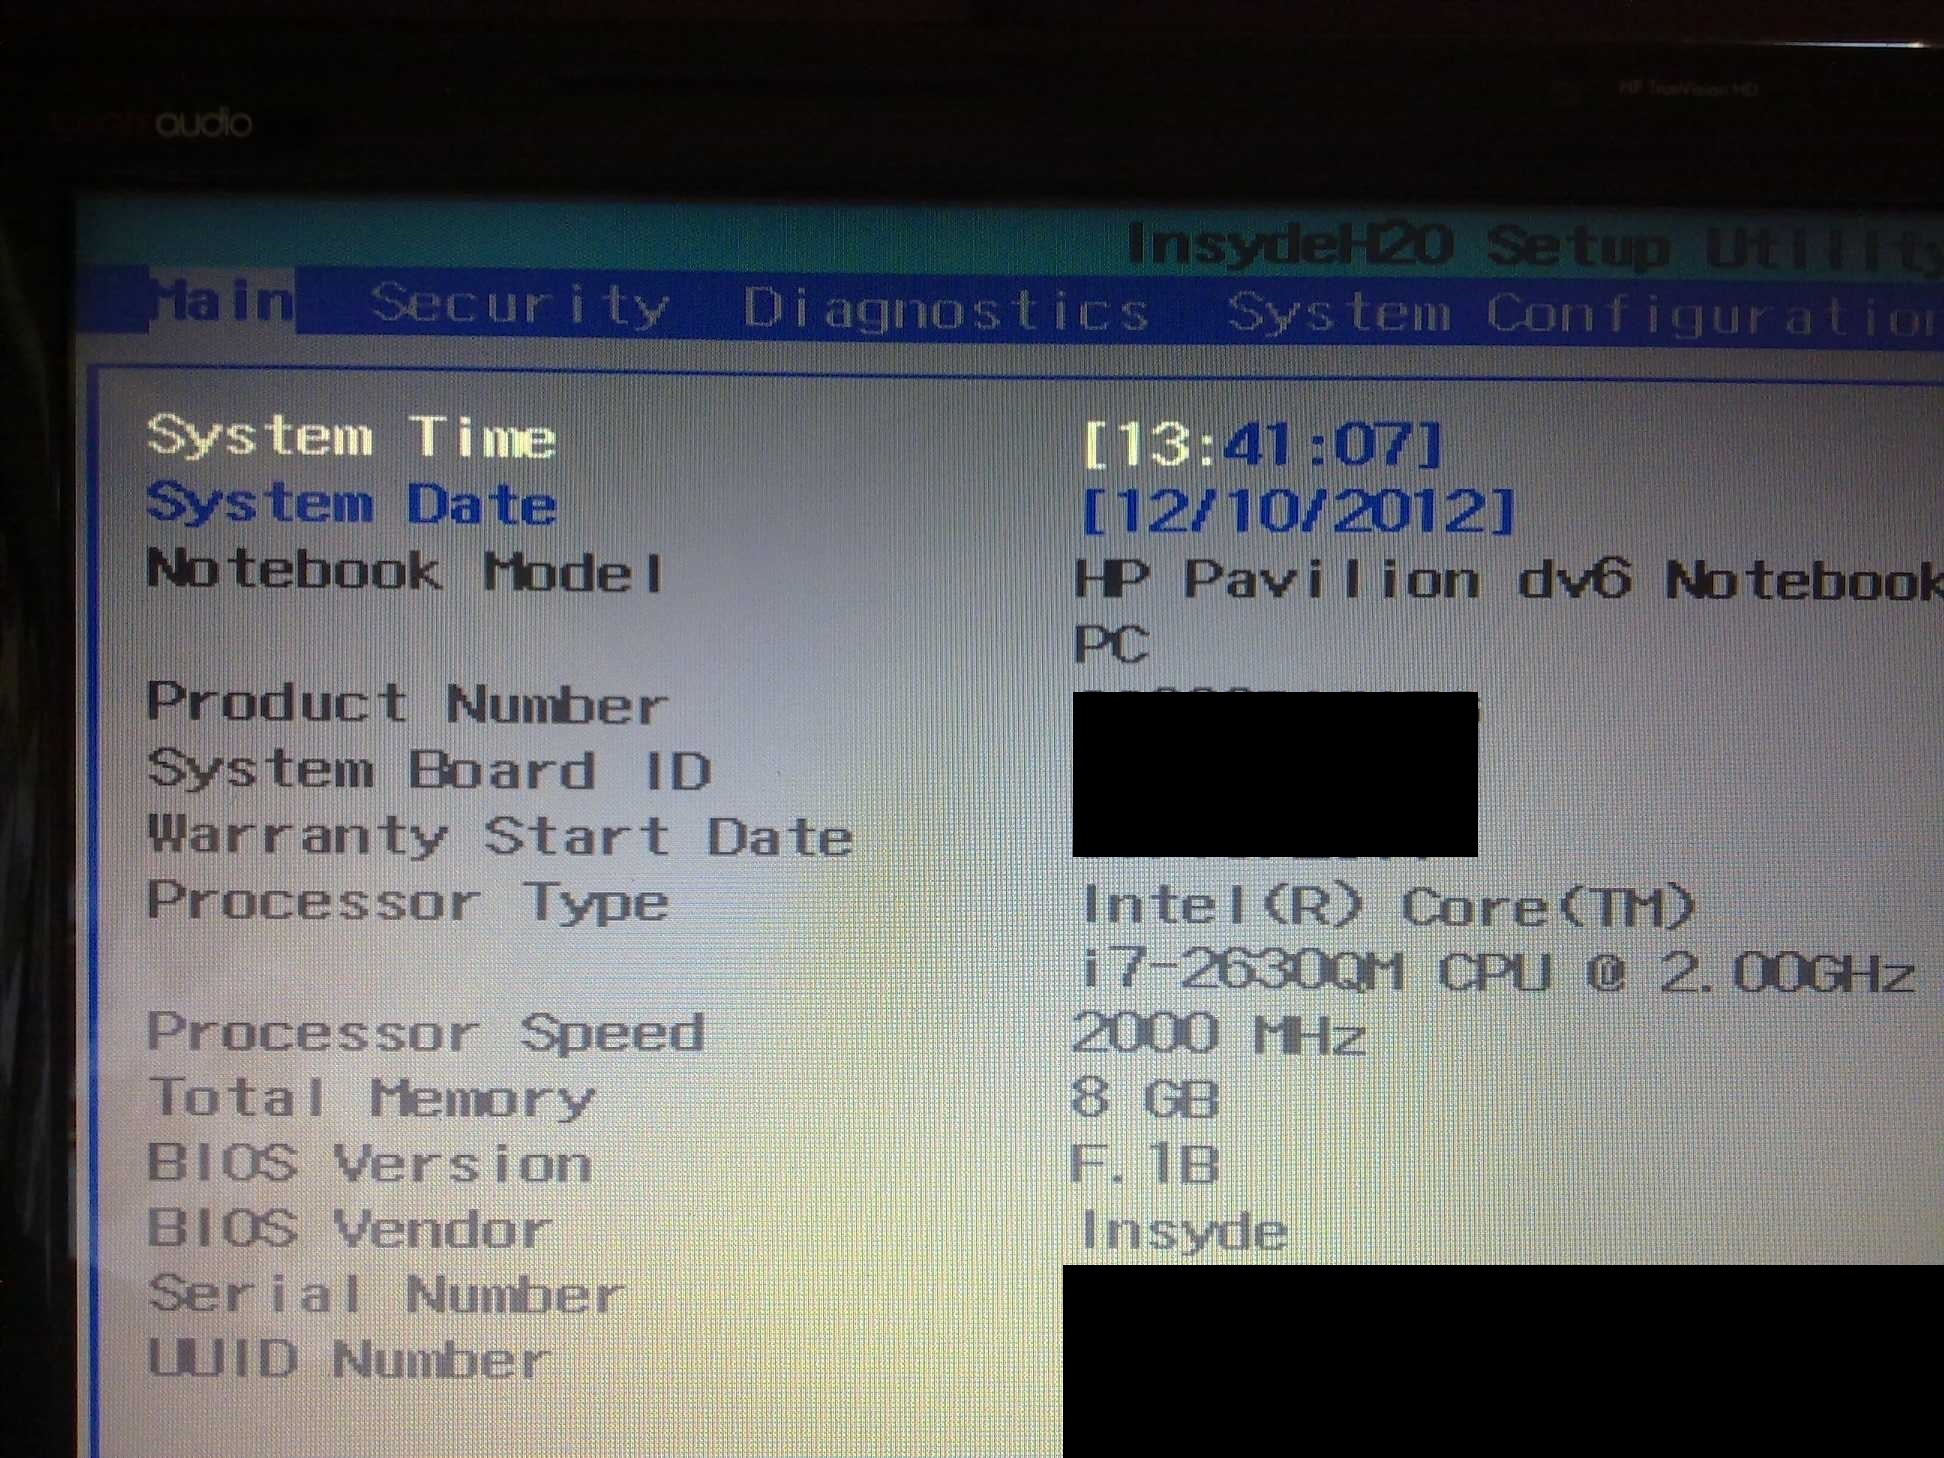 Solved: Updating ATI Radeon 6770m Drivers for HP Pavilion dv6 6141. - Page  2 - HP Support Community - 2237305